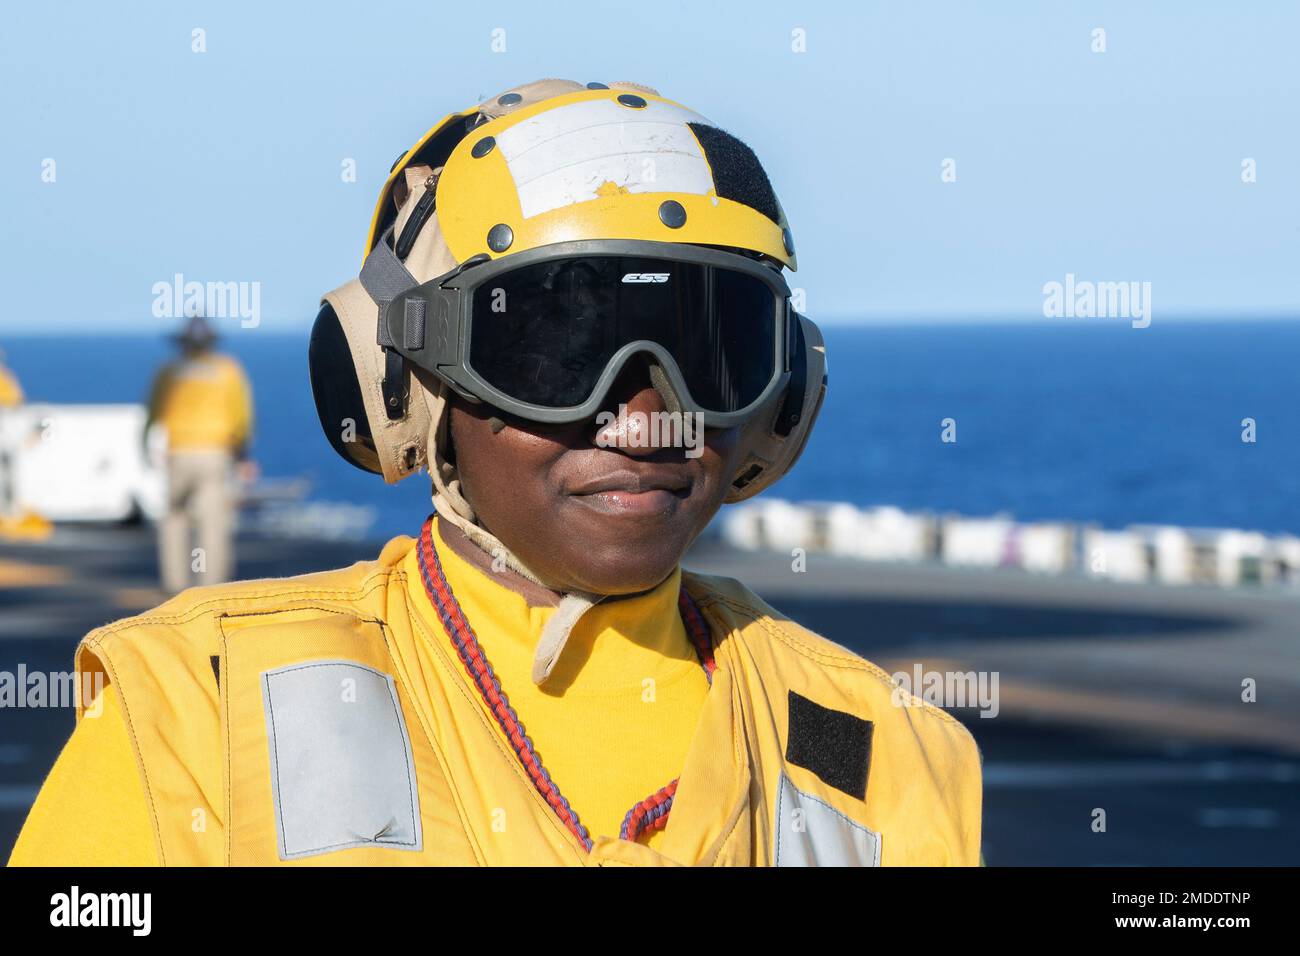 220722-N-XN177-2018 PACIFIC OCEAN (July 22, 2022) – Aviation Boatswain’s Mate (Handling) 1st Class Cortriee Gibbs, from Goldsboro, North Carolina, observes flight operations aboard amphibious assault carrier USS Tripoli (LHA 7), July 22, 2022. Tripoli is operating in the U.S. 7th Fleet area of operations to enhance interoperability with allies and partners and serve as a ready response force to defend peace and maintain stability in the Indo-Pacific region. Stock Photo